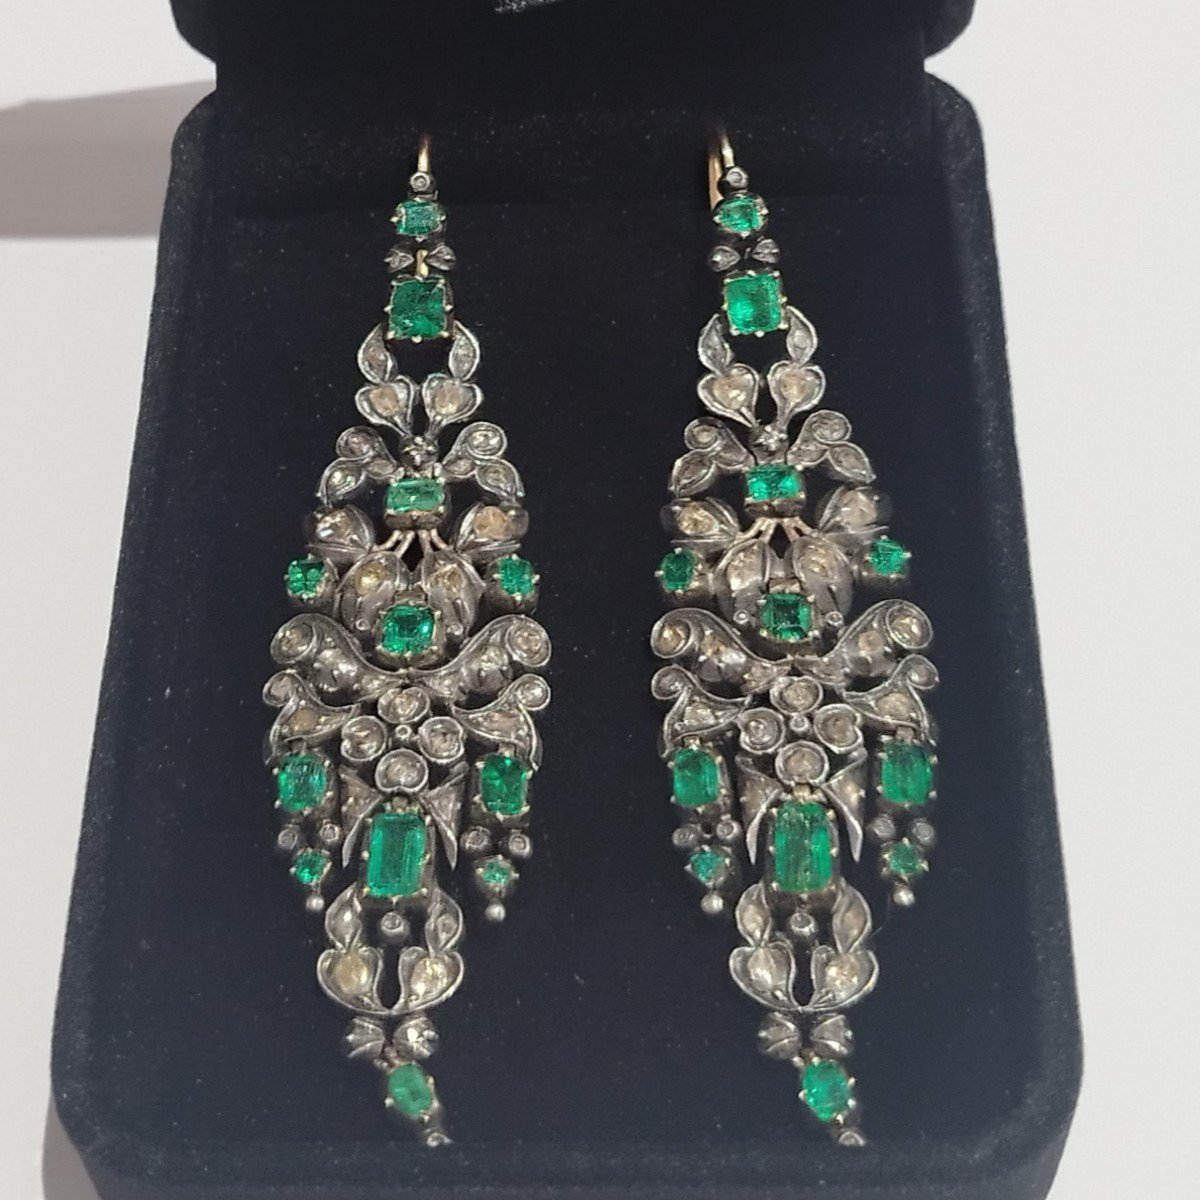 Catalan Earrings From The End Of The 18th Century. Diamonds, Emeralds, 18k Gold And Silver.-photo-2